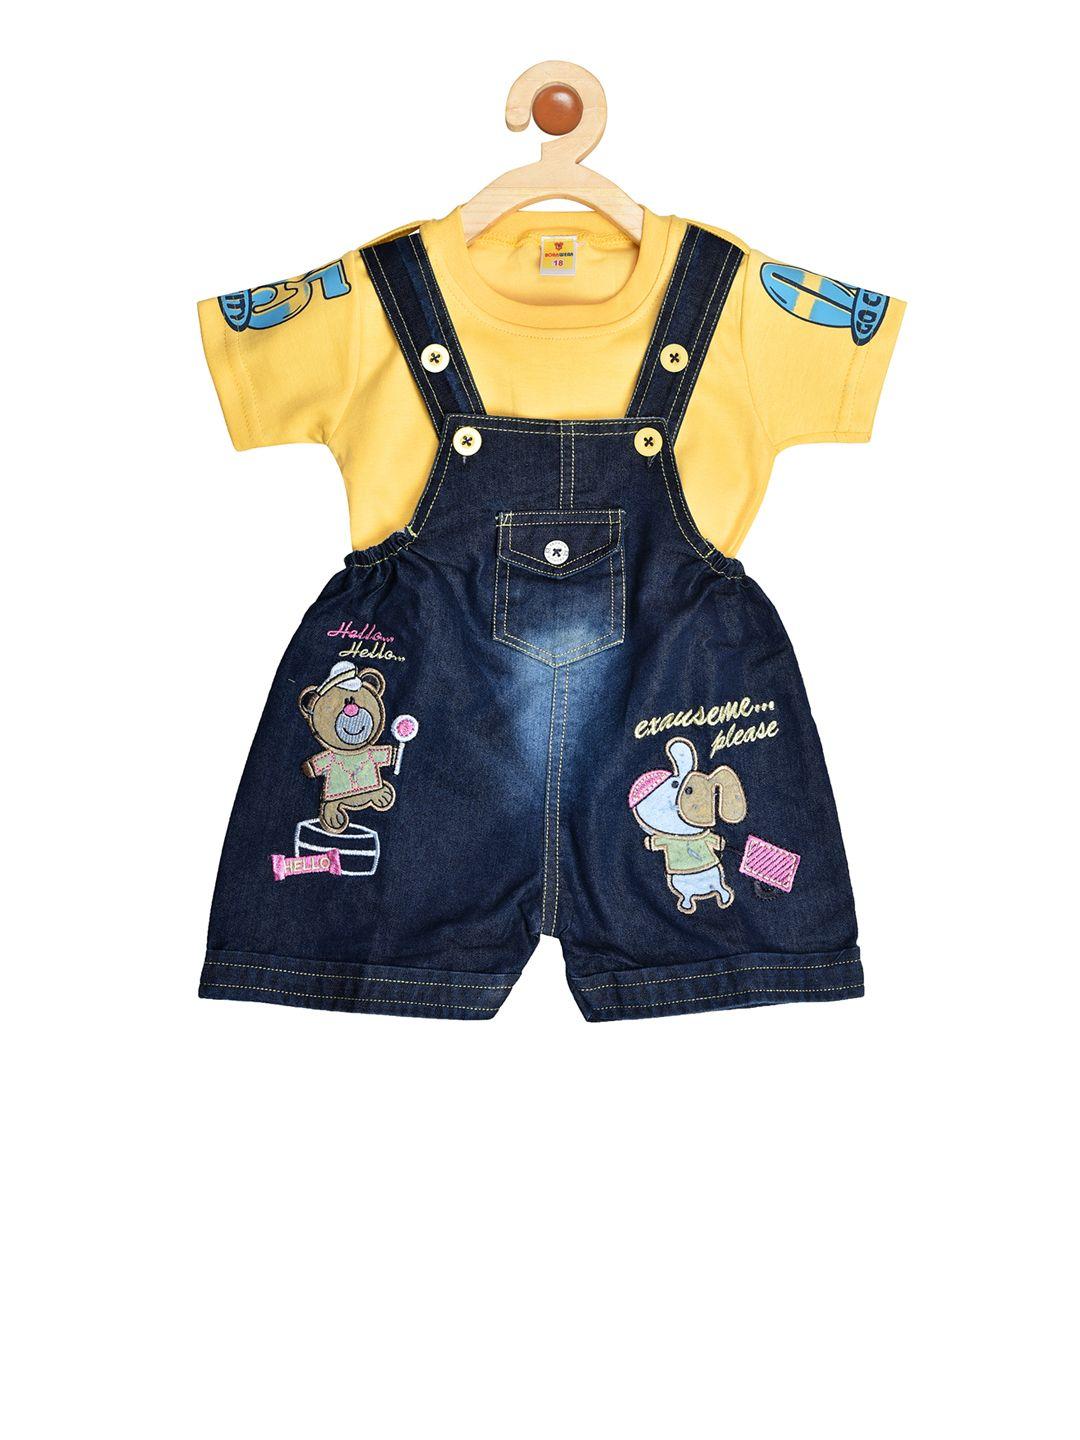 born-wear-unisex-yellow-&-navy-blue-printed-t-shirt-with-dungarees